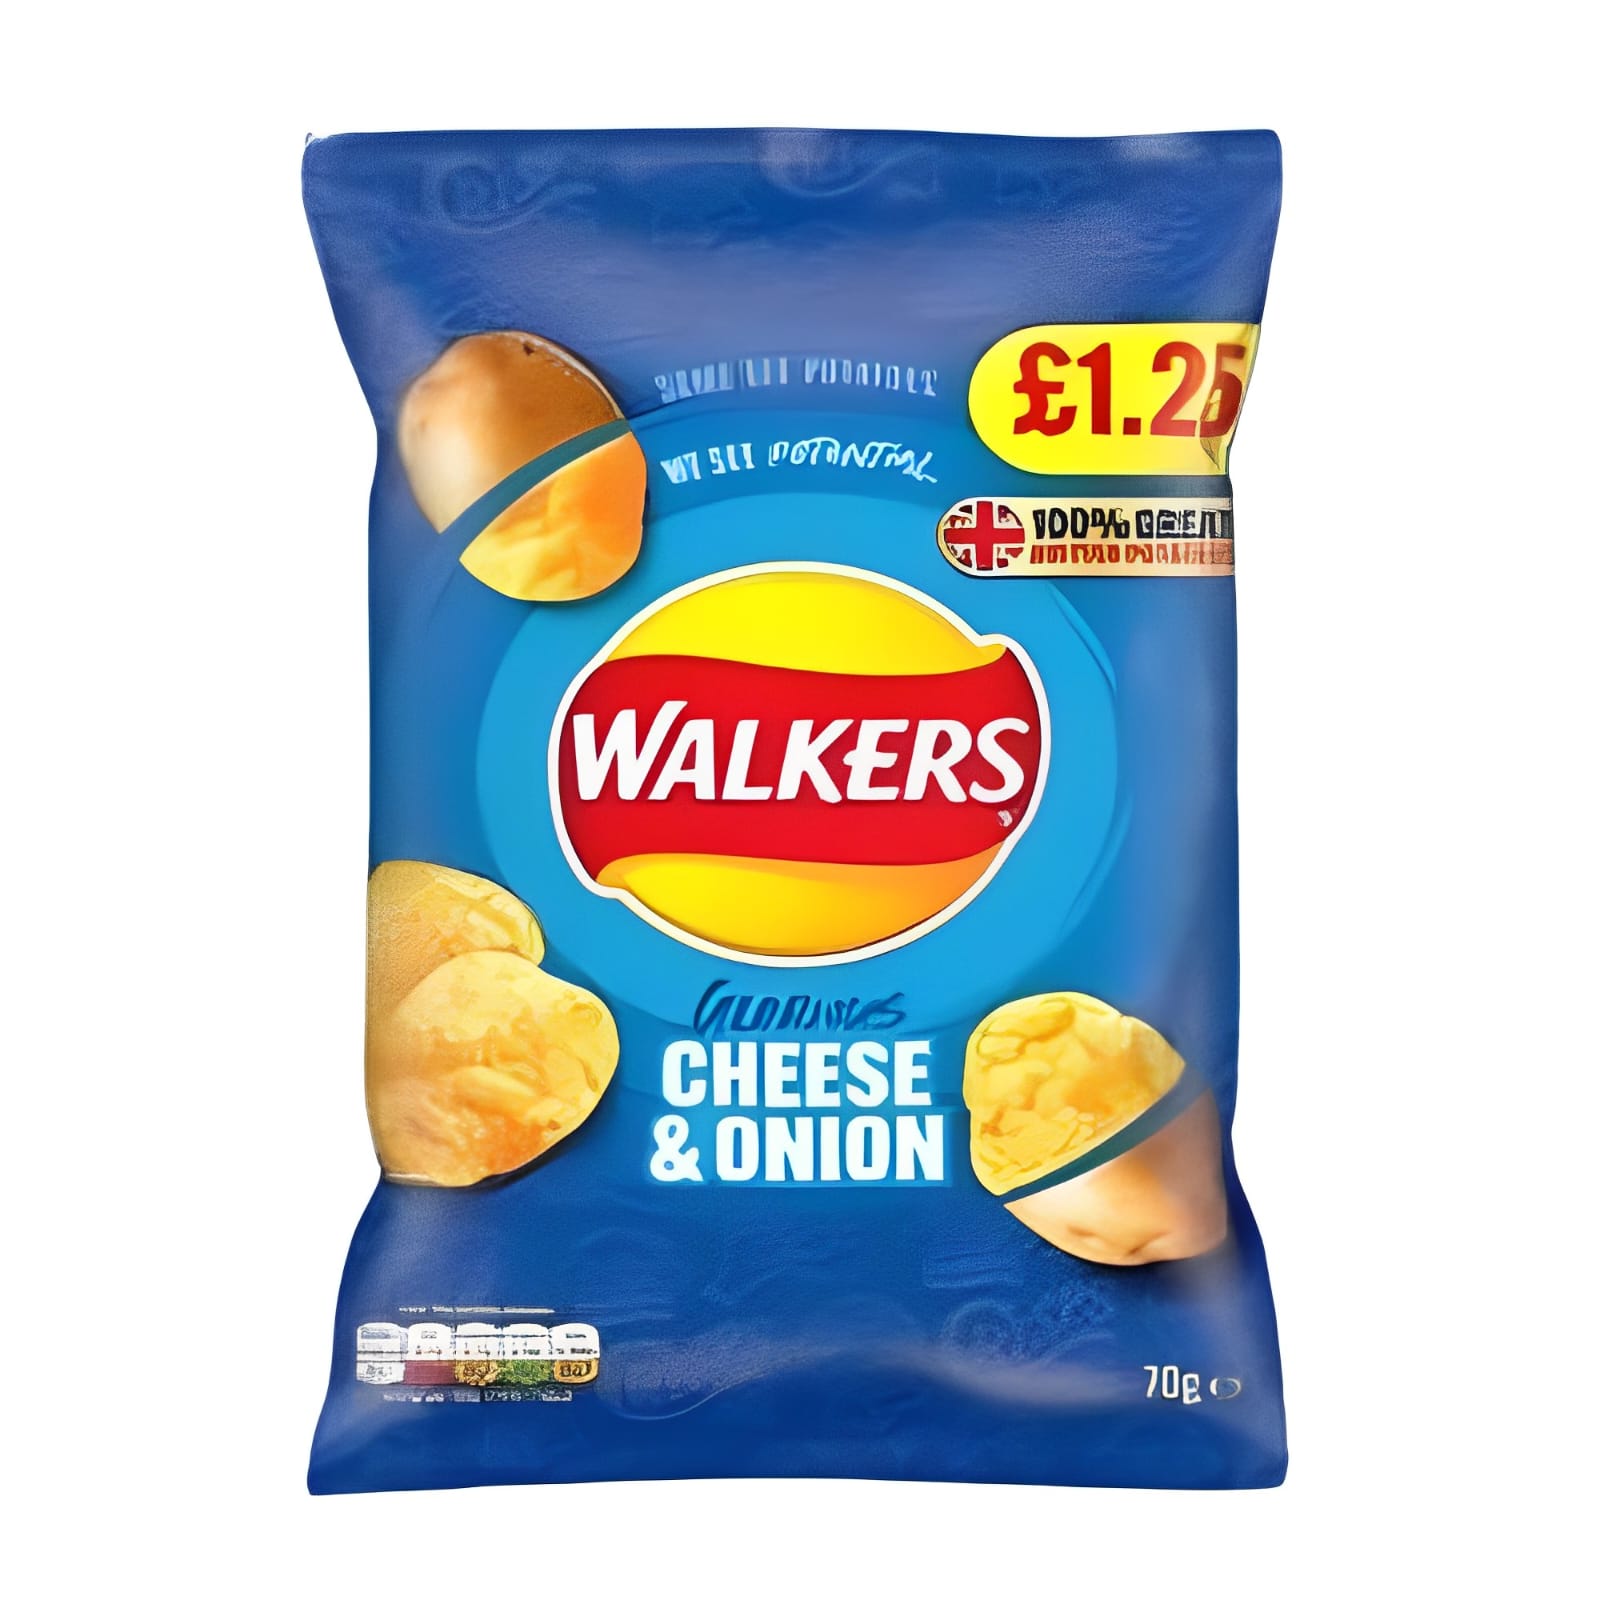 Walkers Cheese & Onion Crisps - 70g